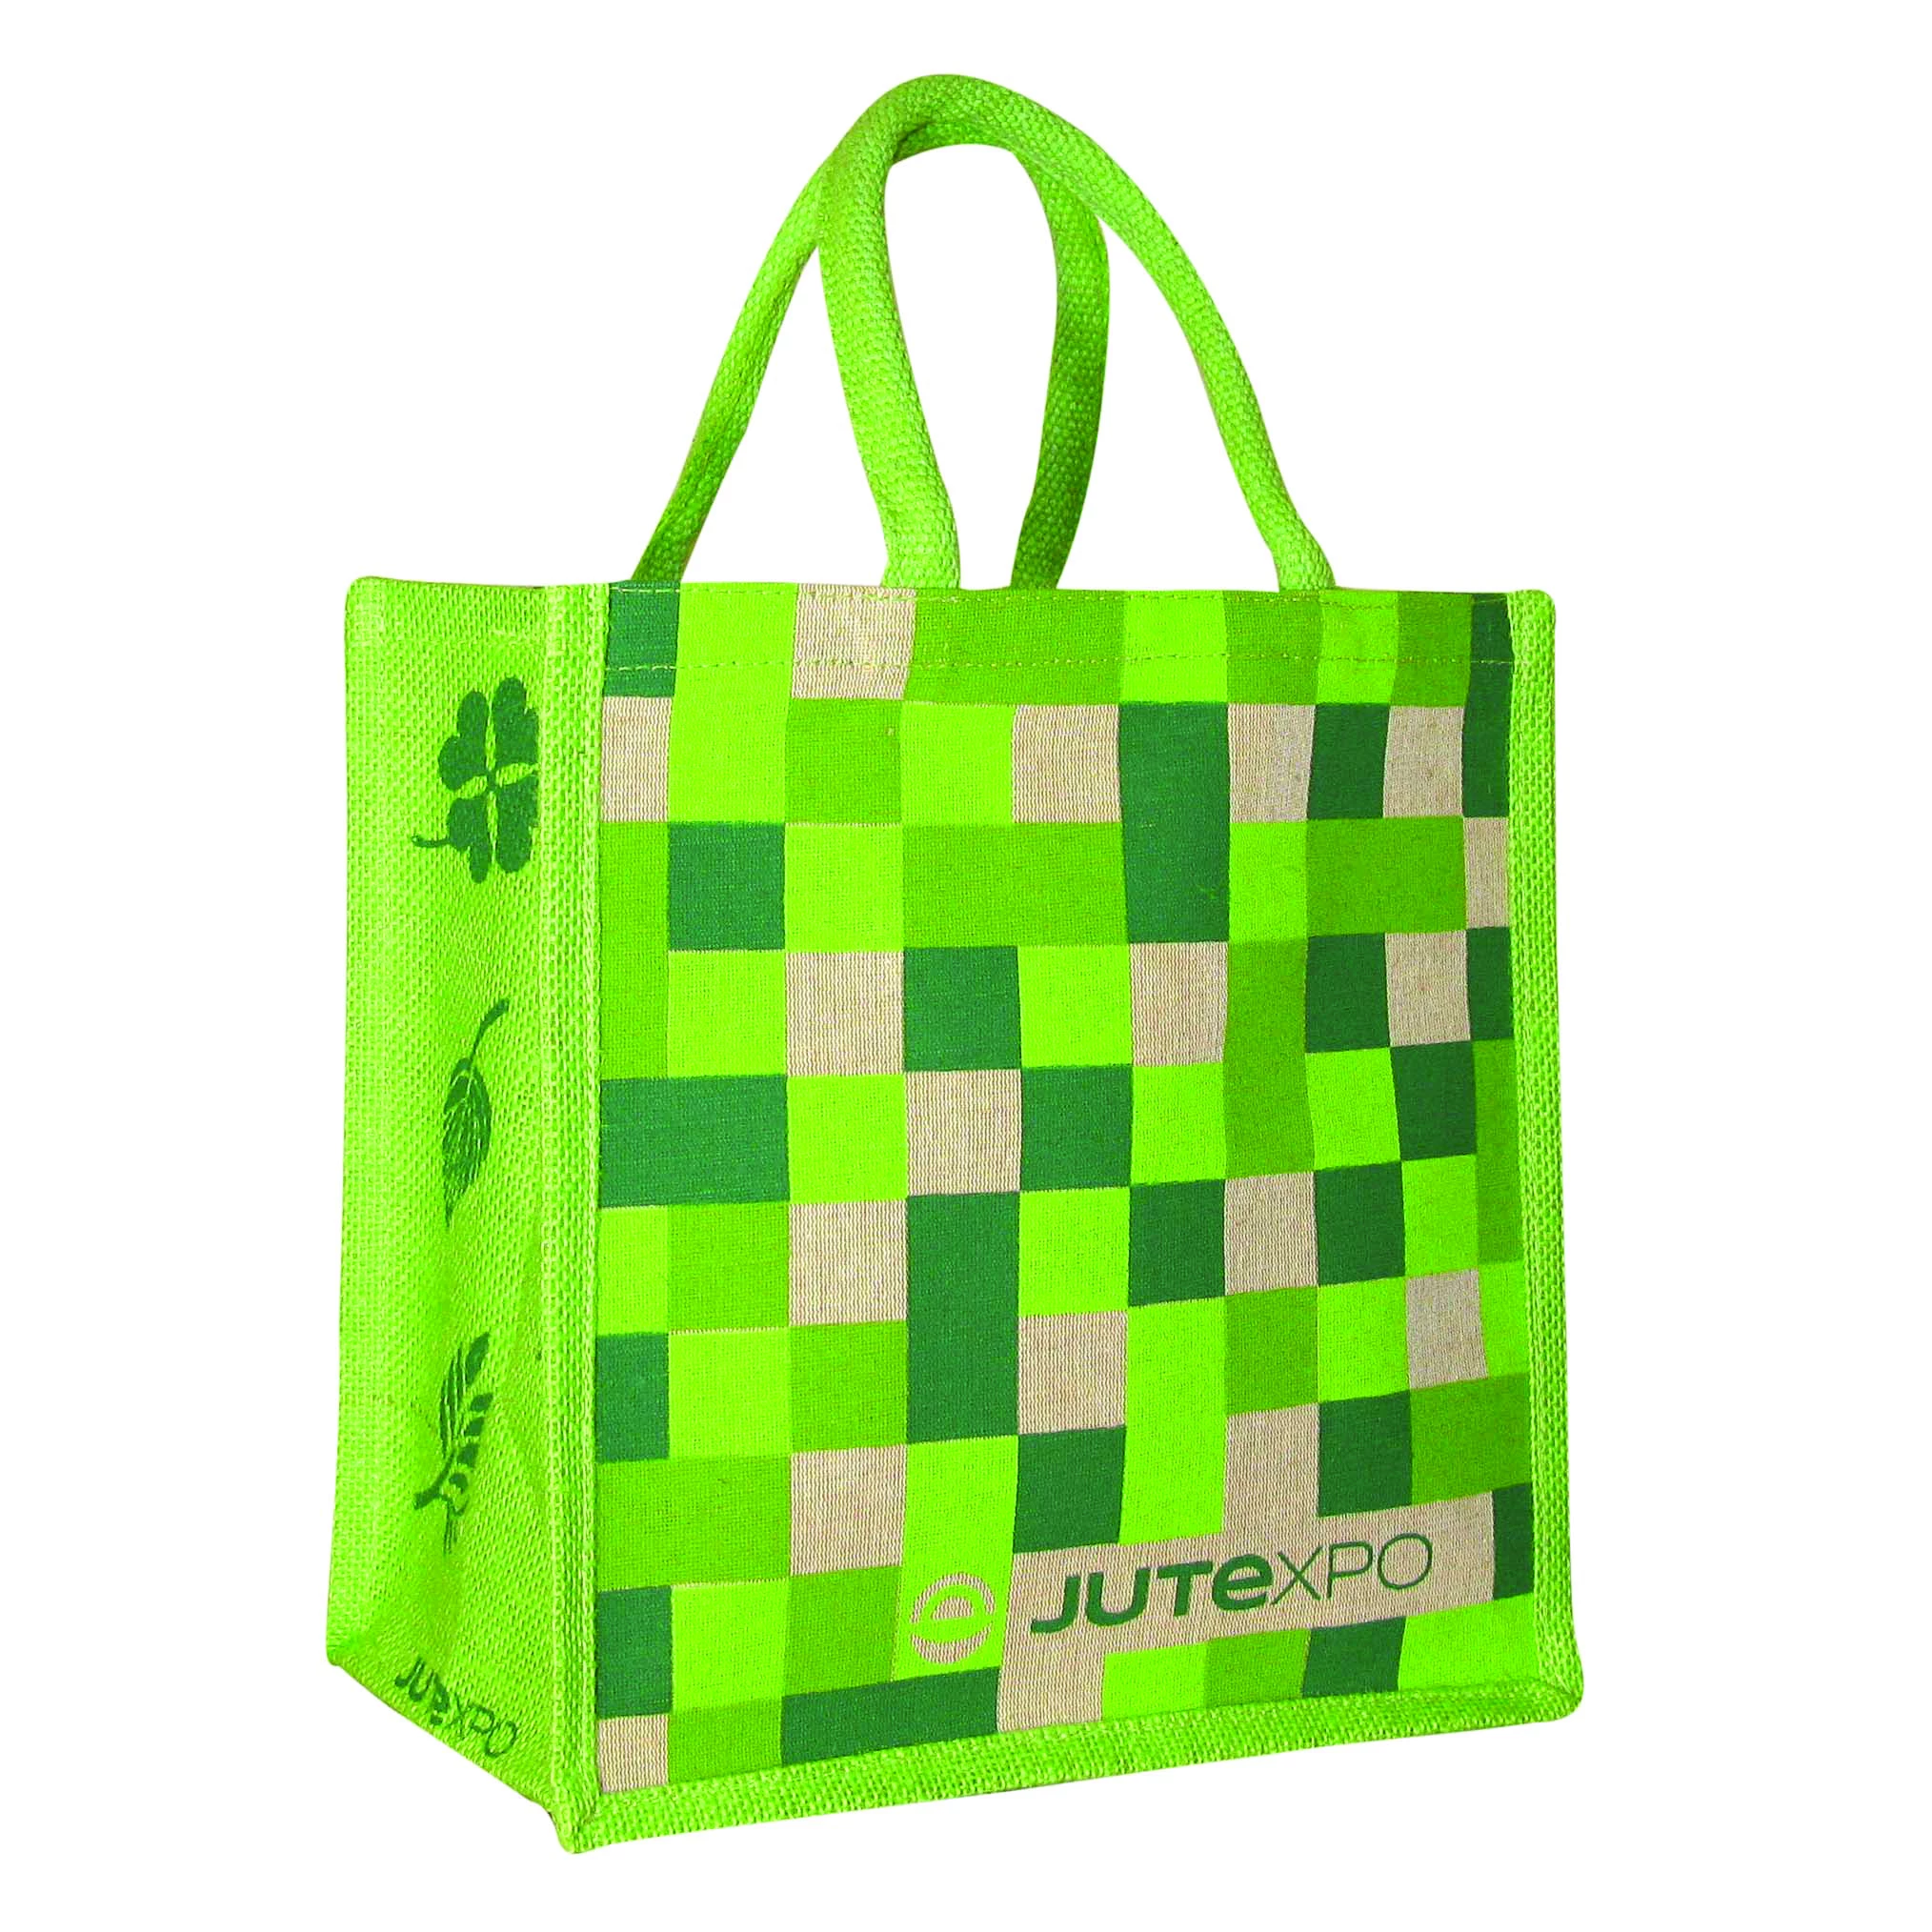 Jute bags reduce the demand for plastic bags by more than six billion